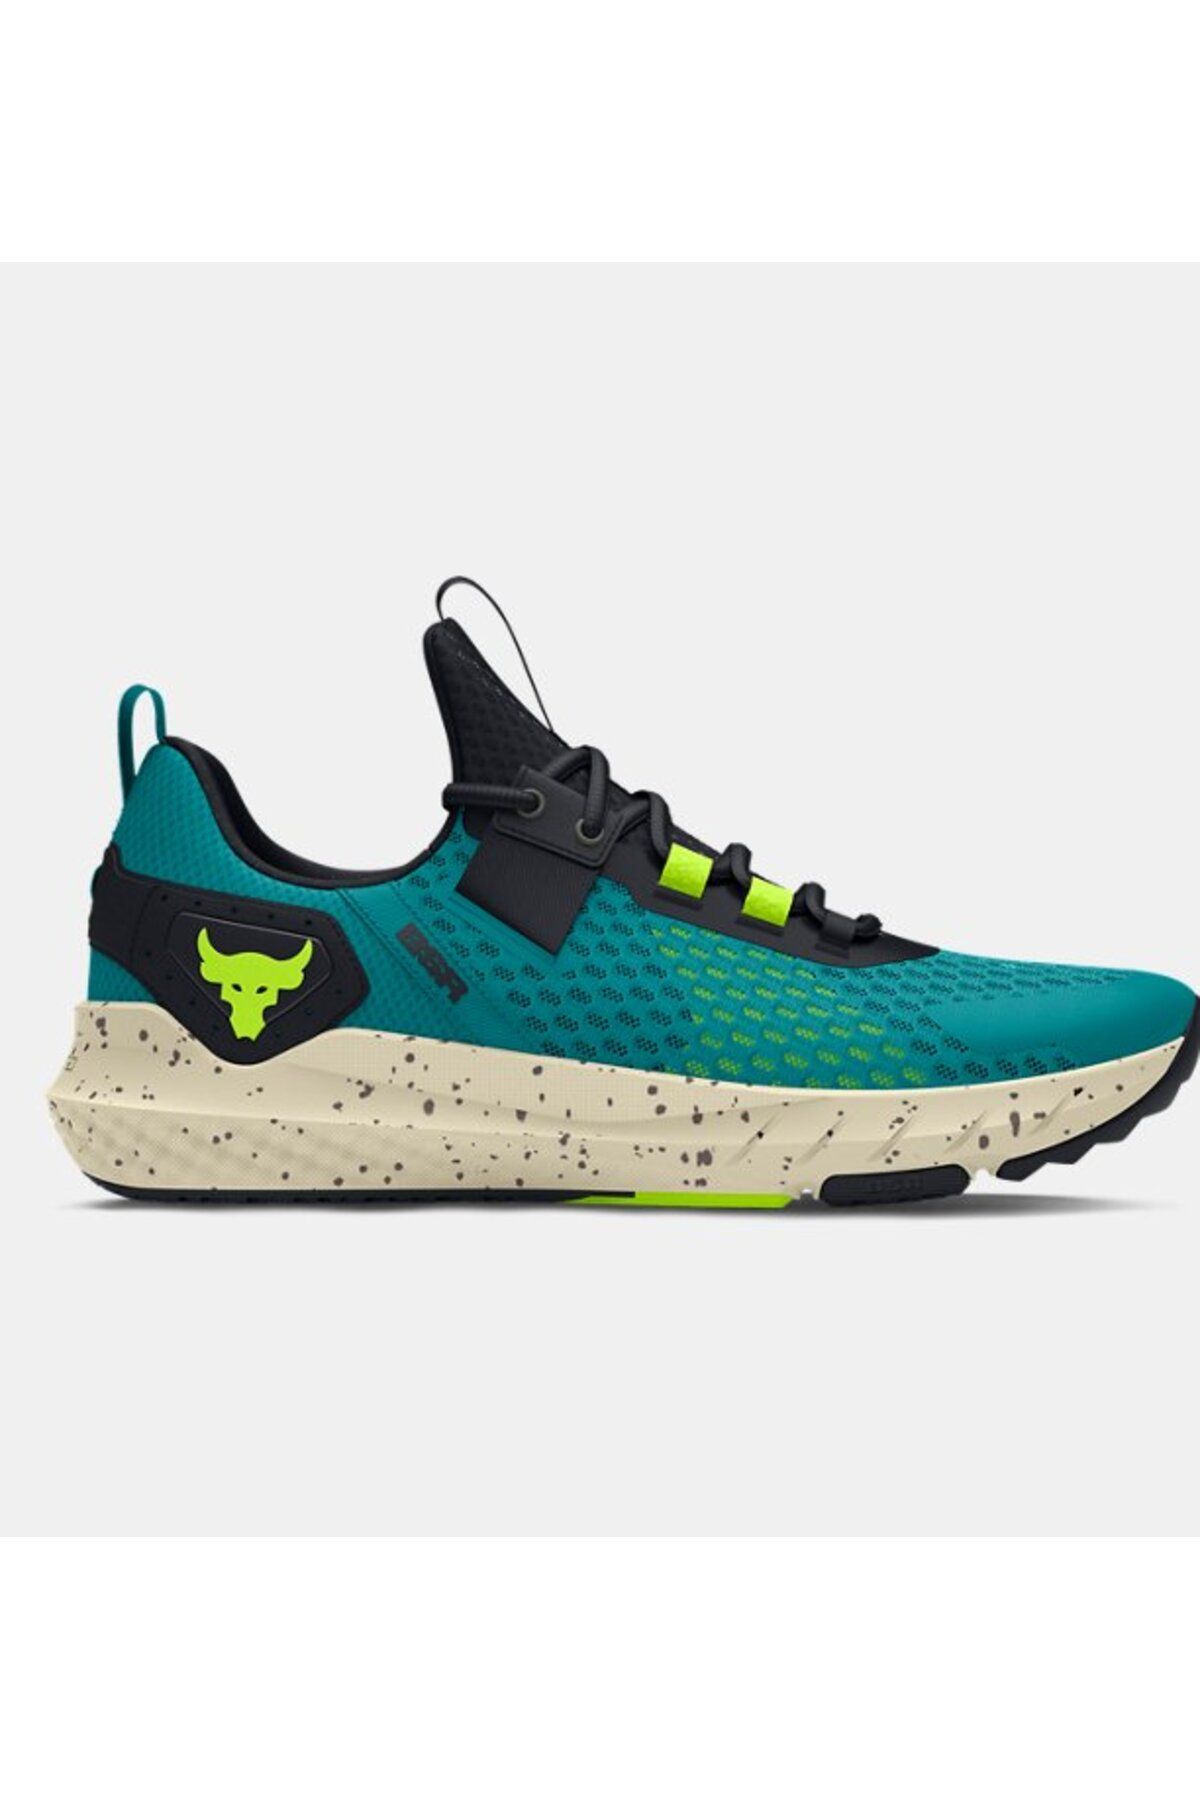 Under Armour UA Project Rock BSR 4 3027344-300